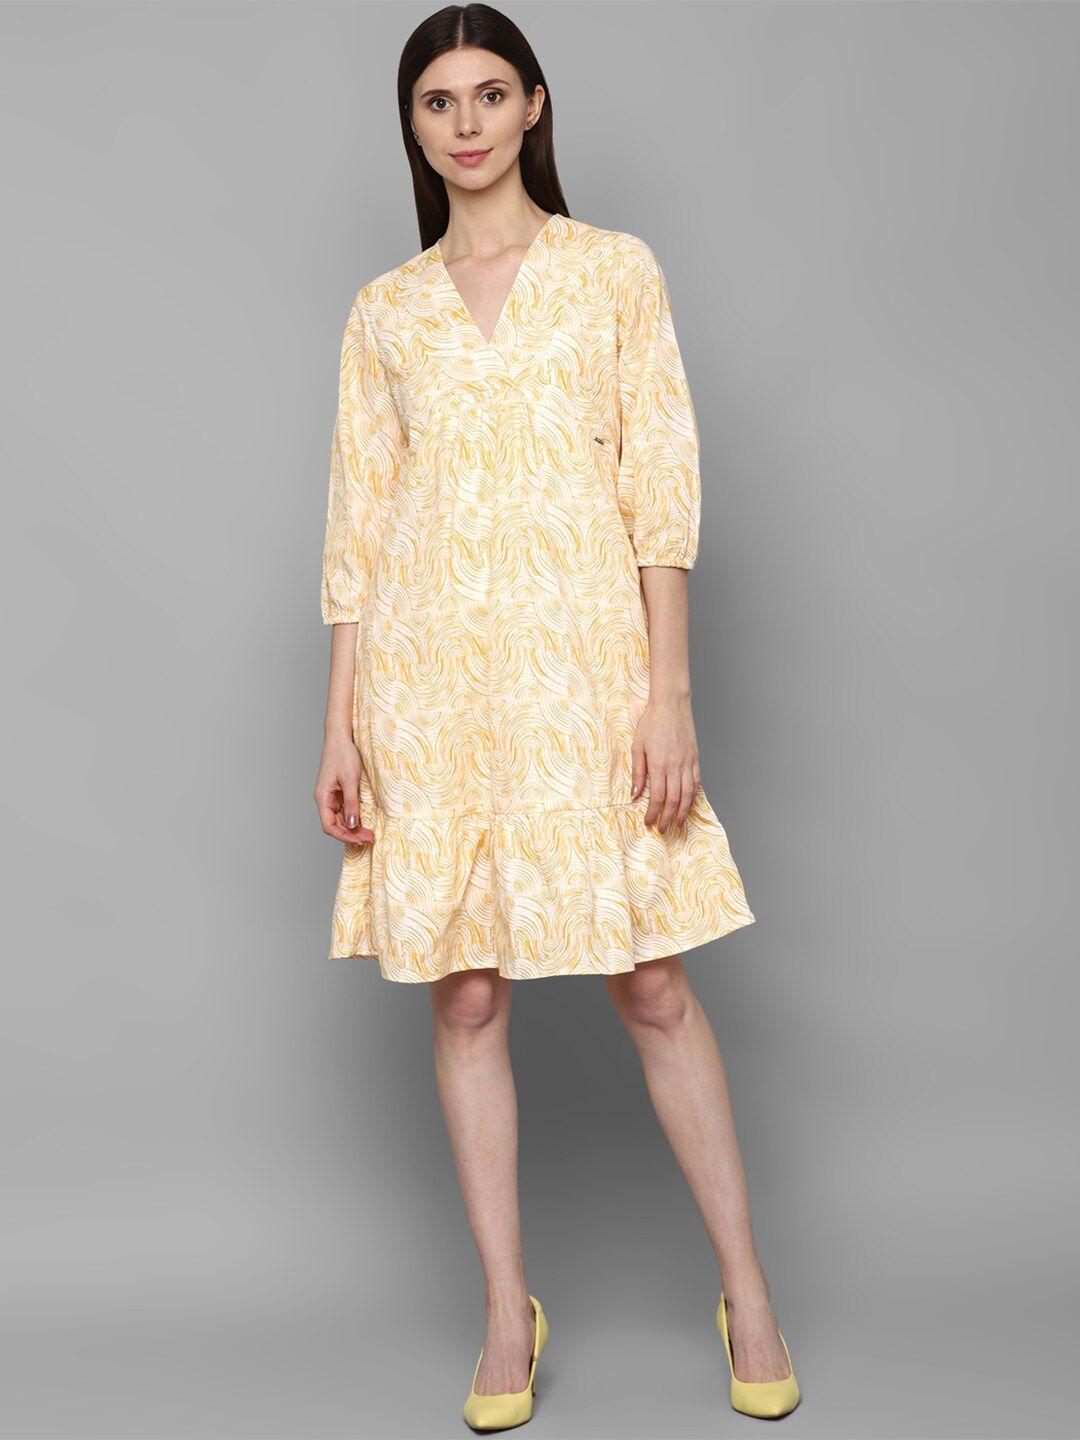 allen solly woman orange puffed sleeves v neck above knee printed dress